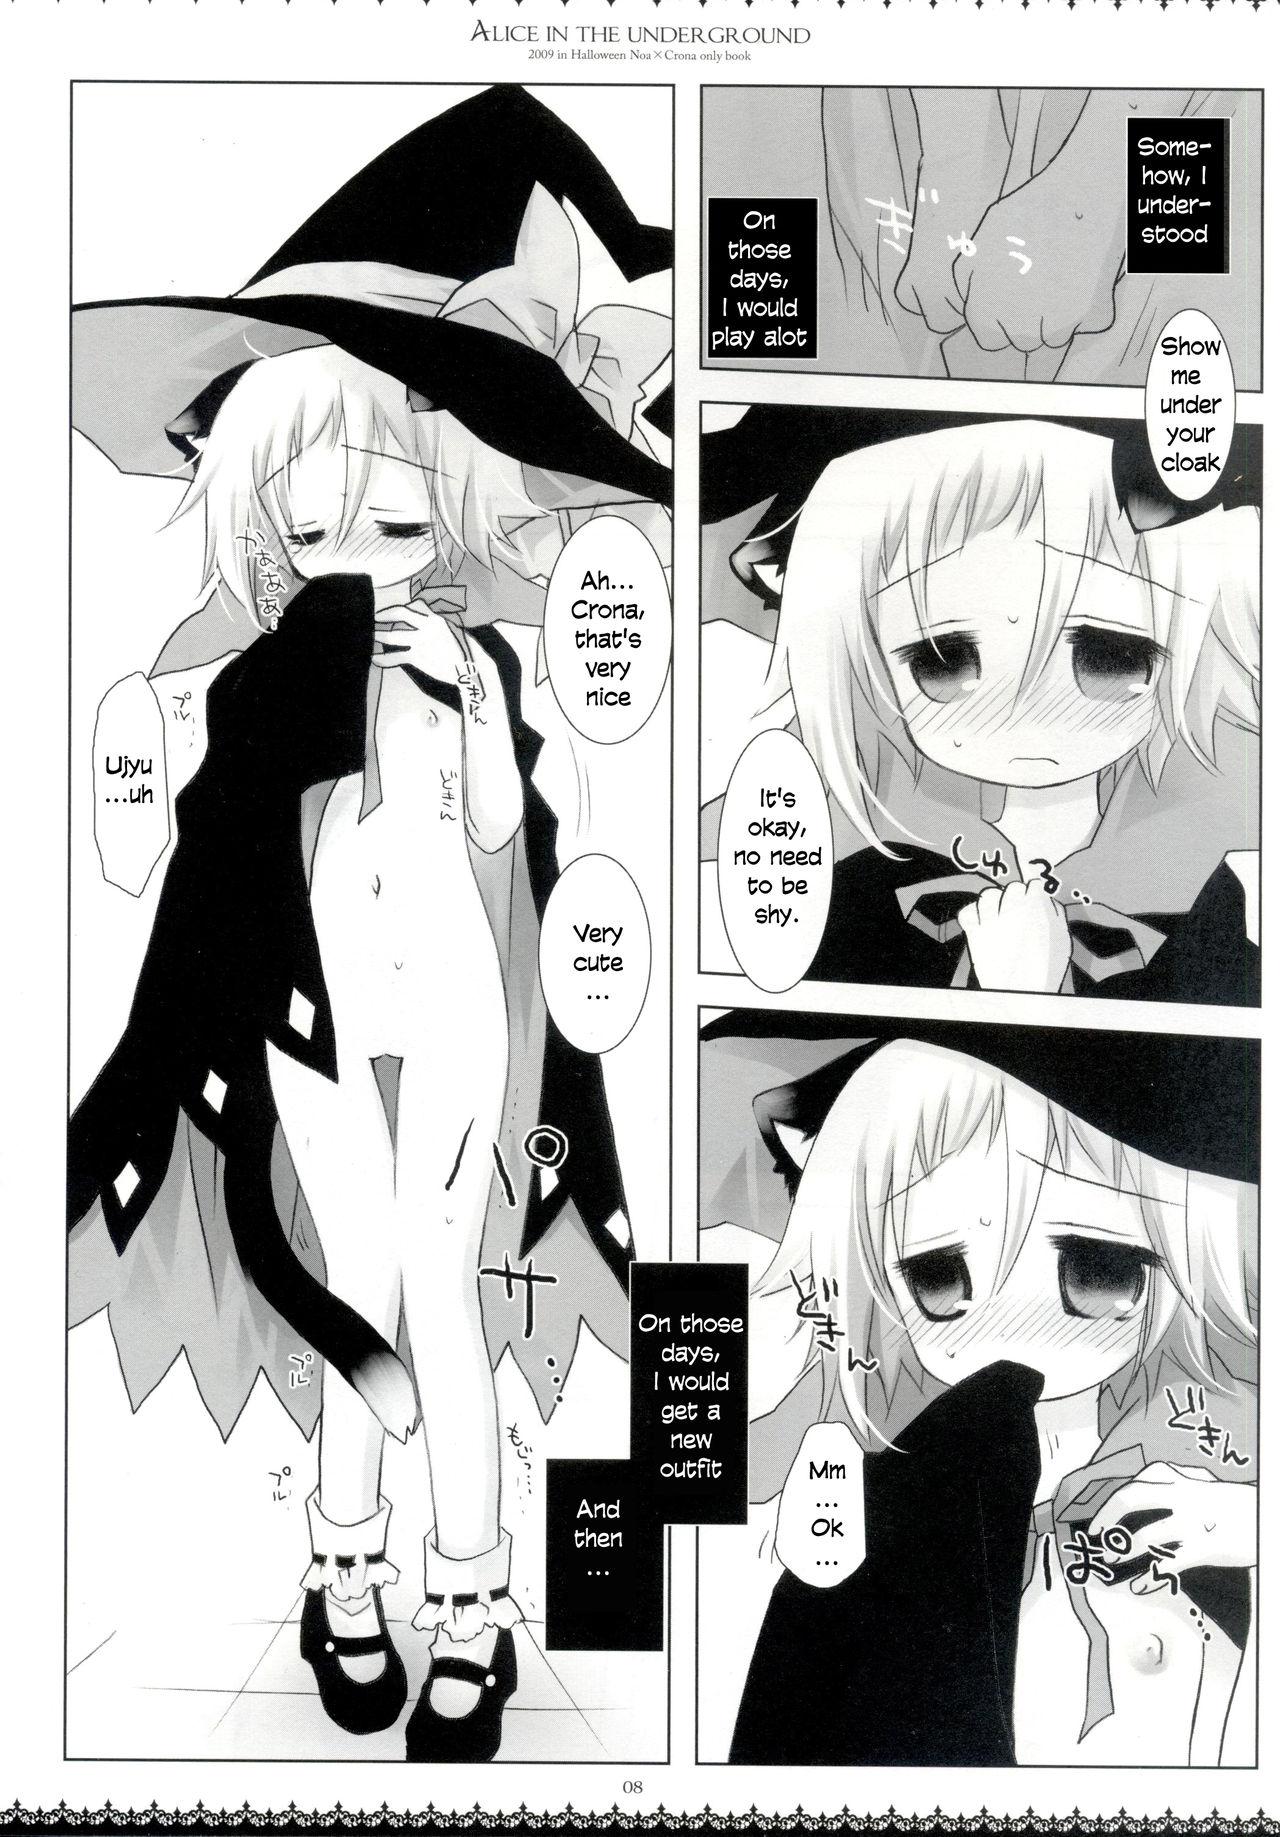 Wanking Alice in the underground - Soul eater Footjob - Page 7